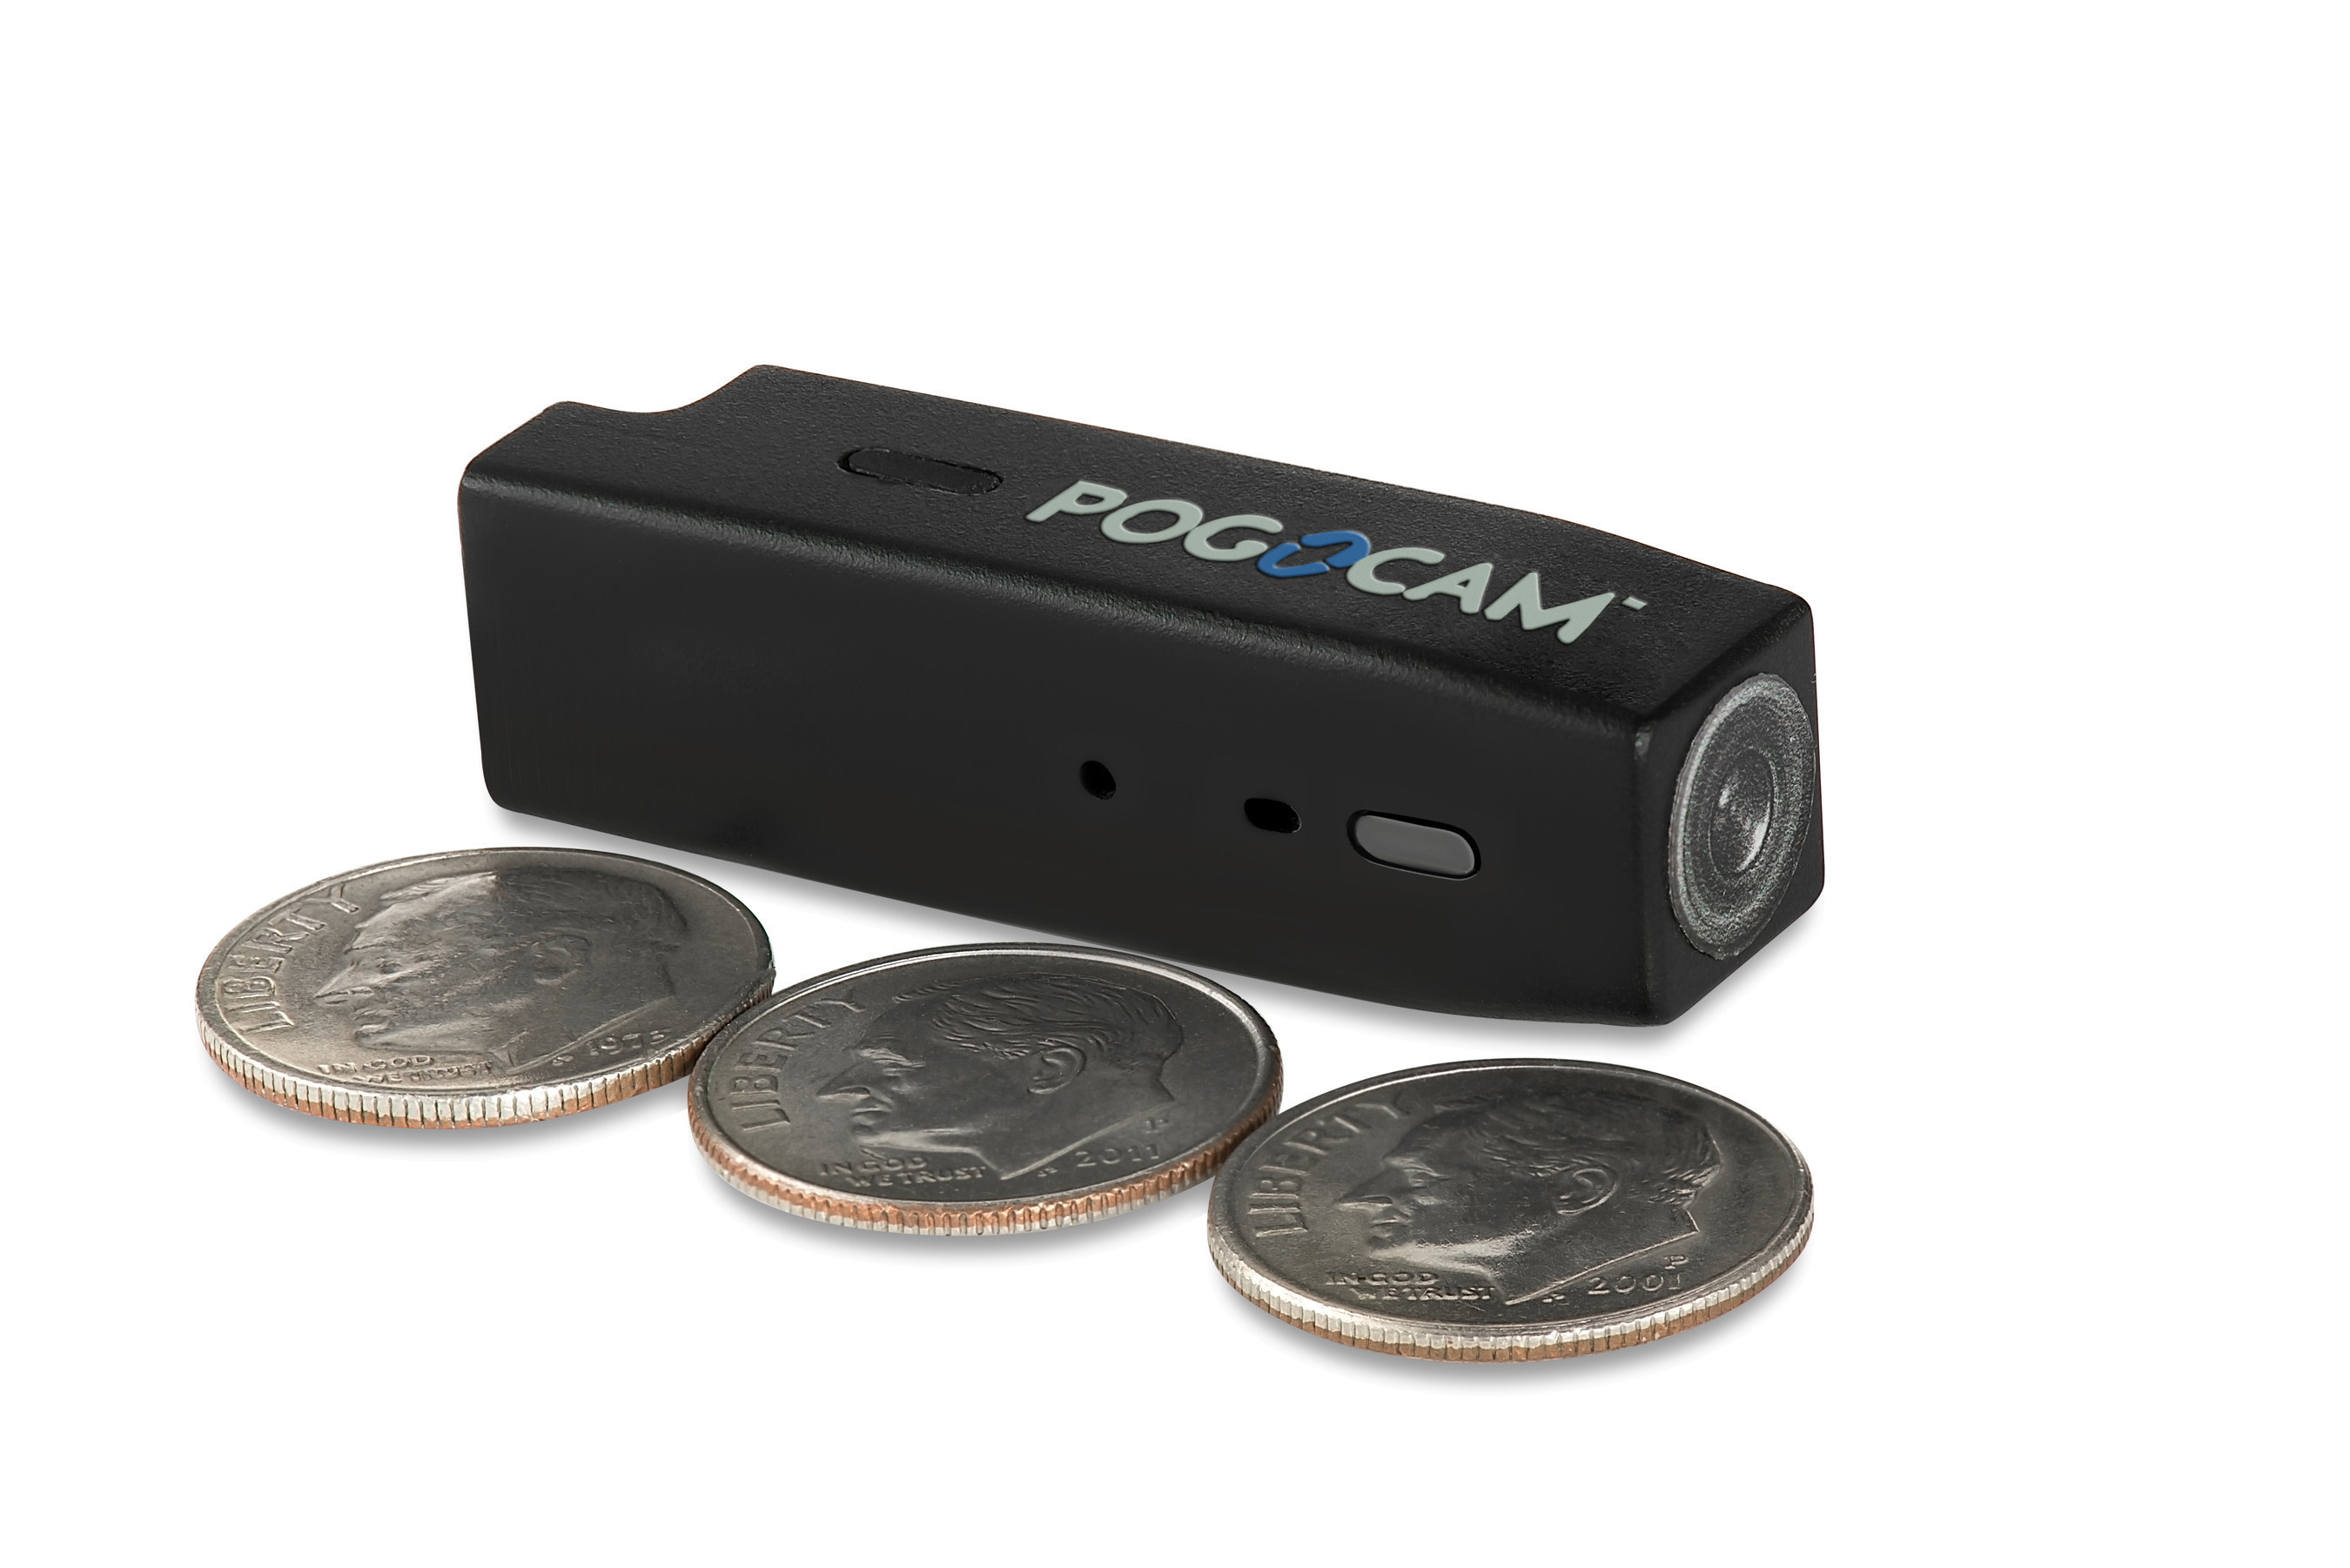 PogoCam(TM) weighs less than two dimes and measures only 10.9 x 12.5 x 42.8 millimeters